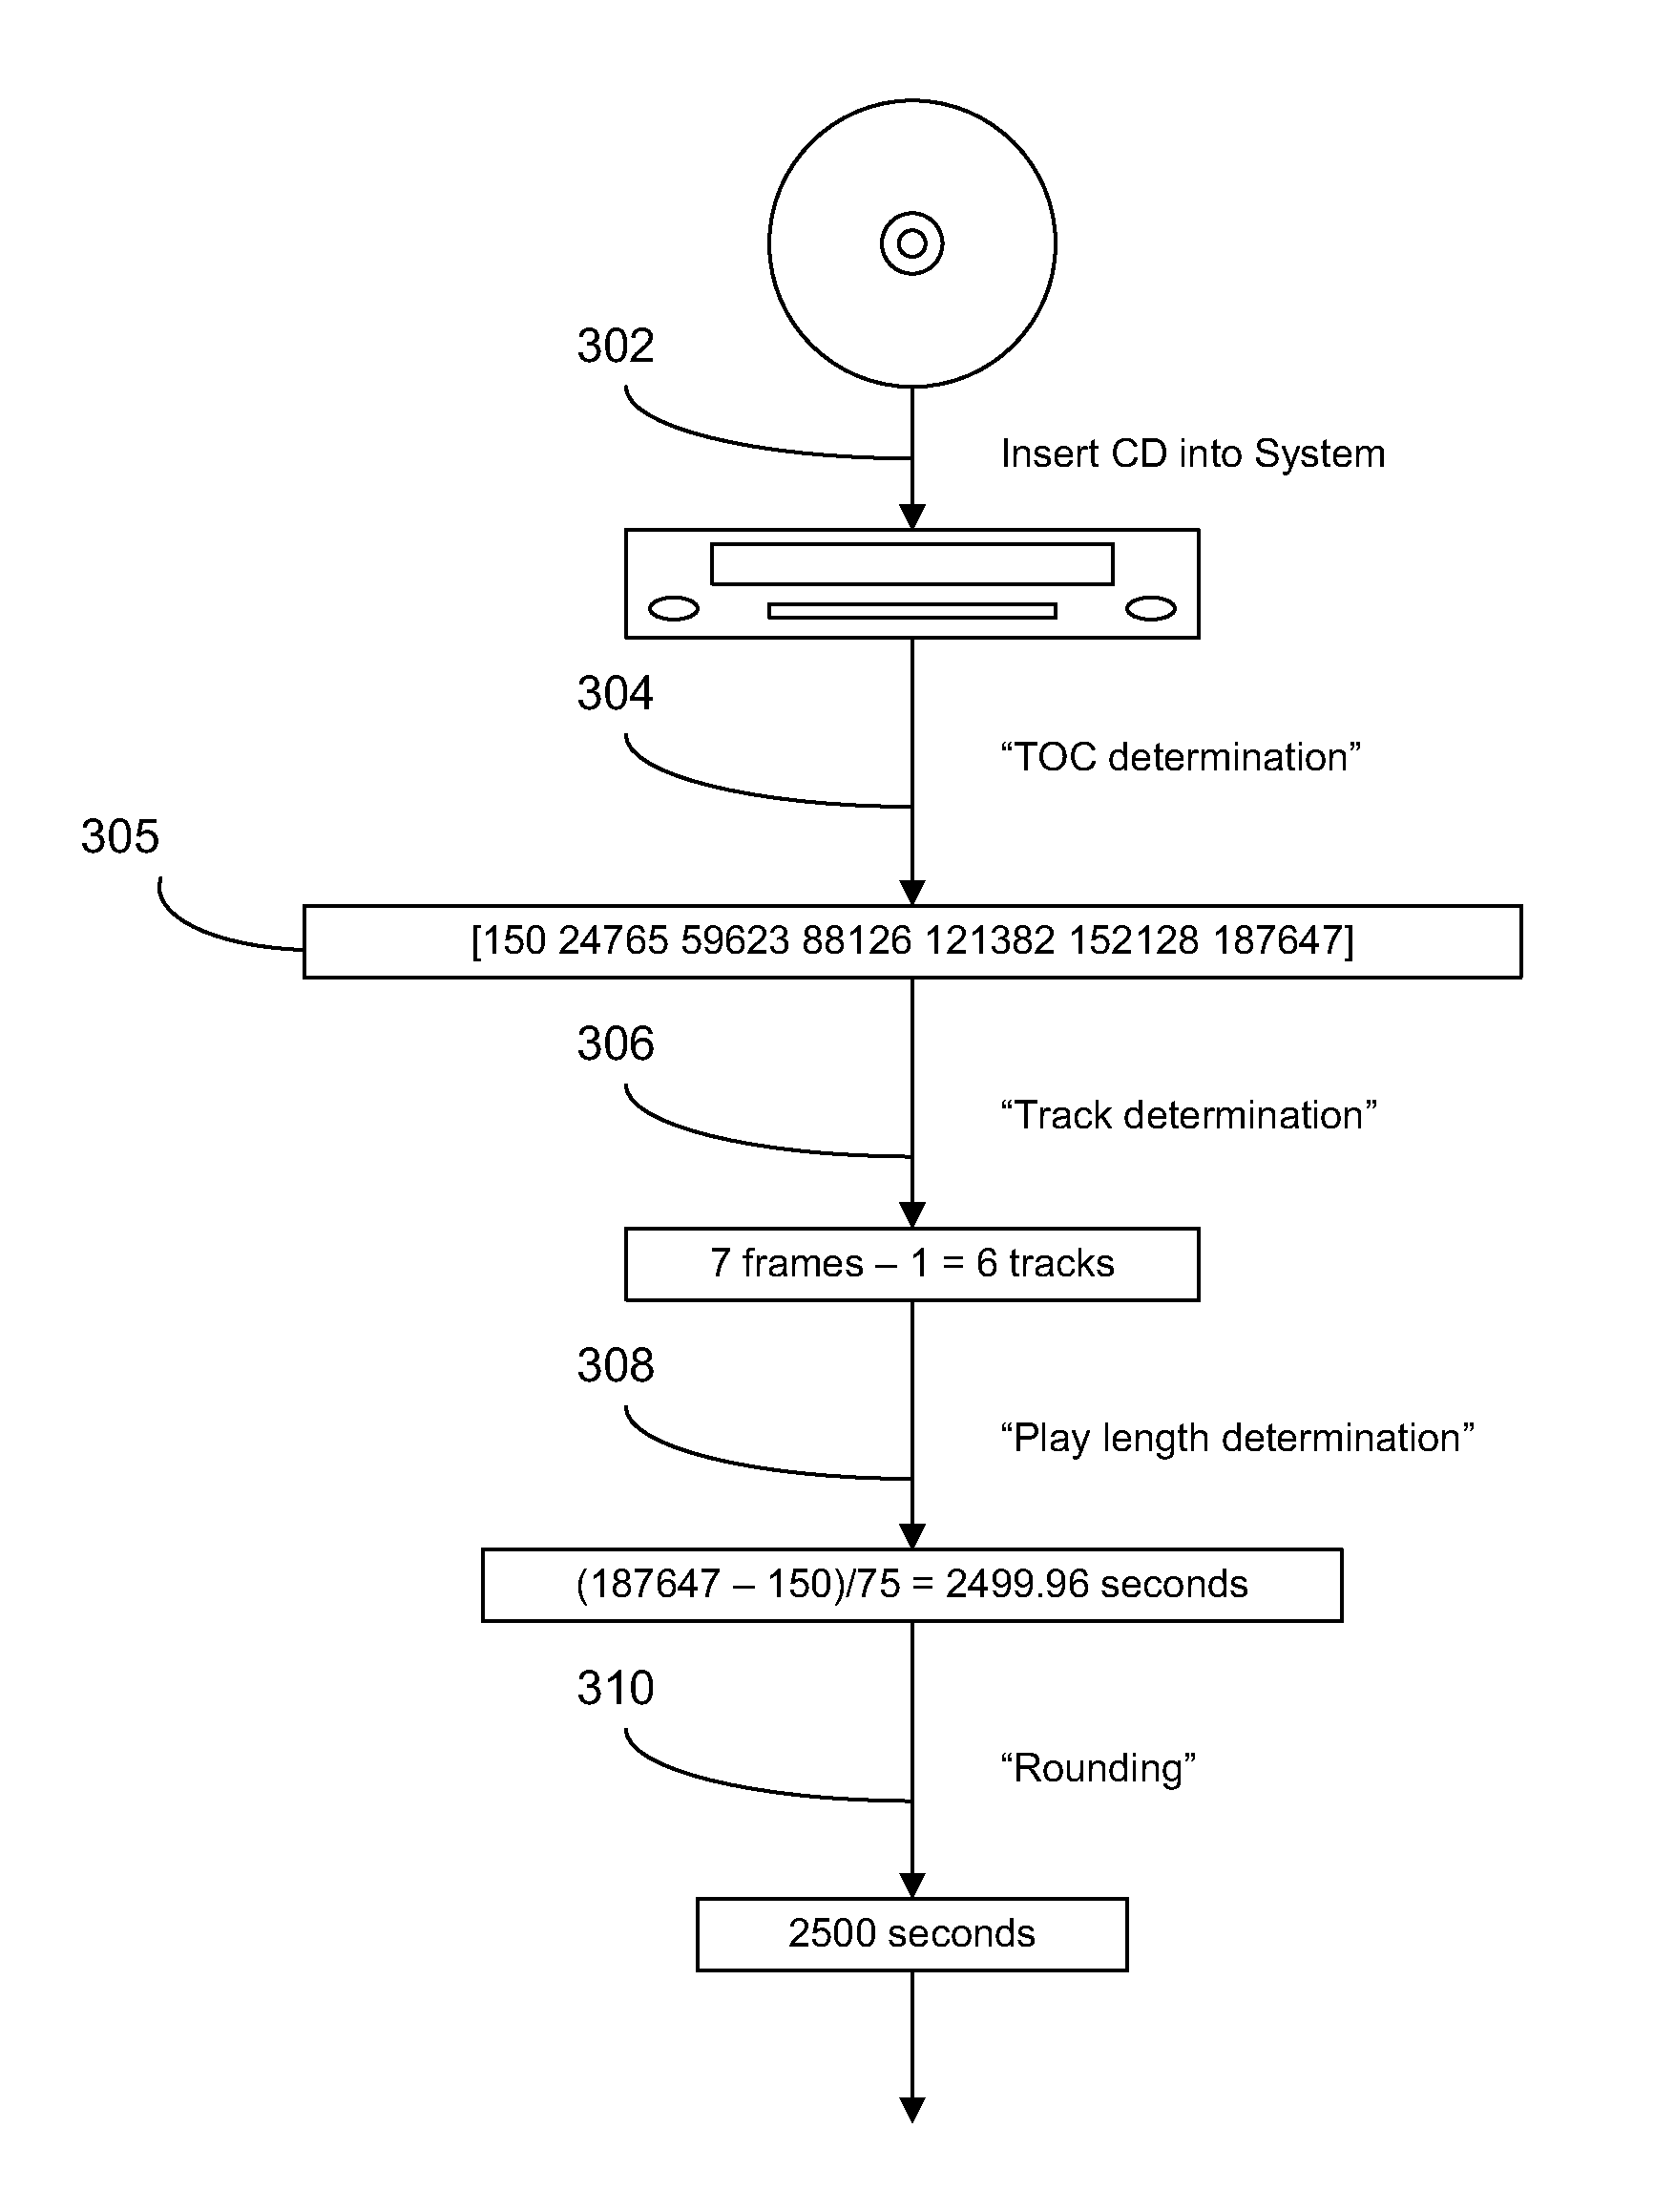 Static toc indexing system and method